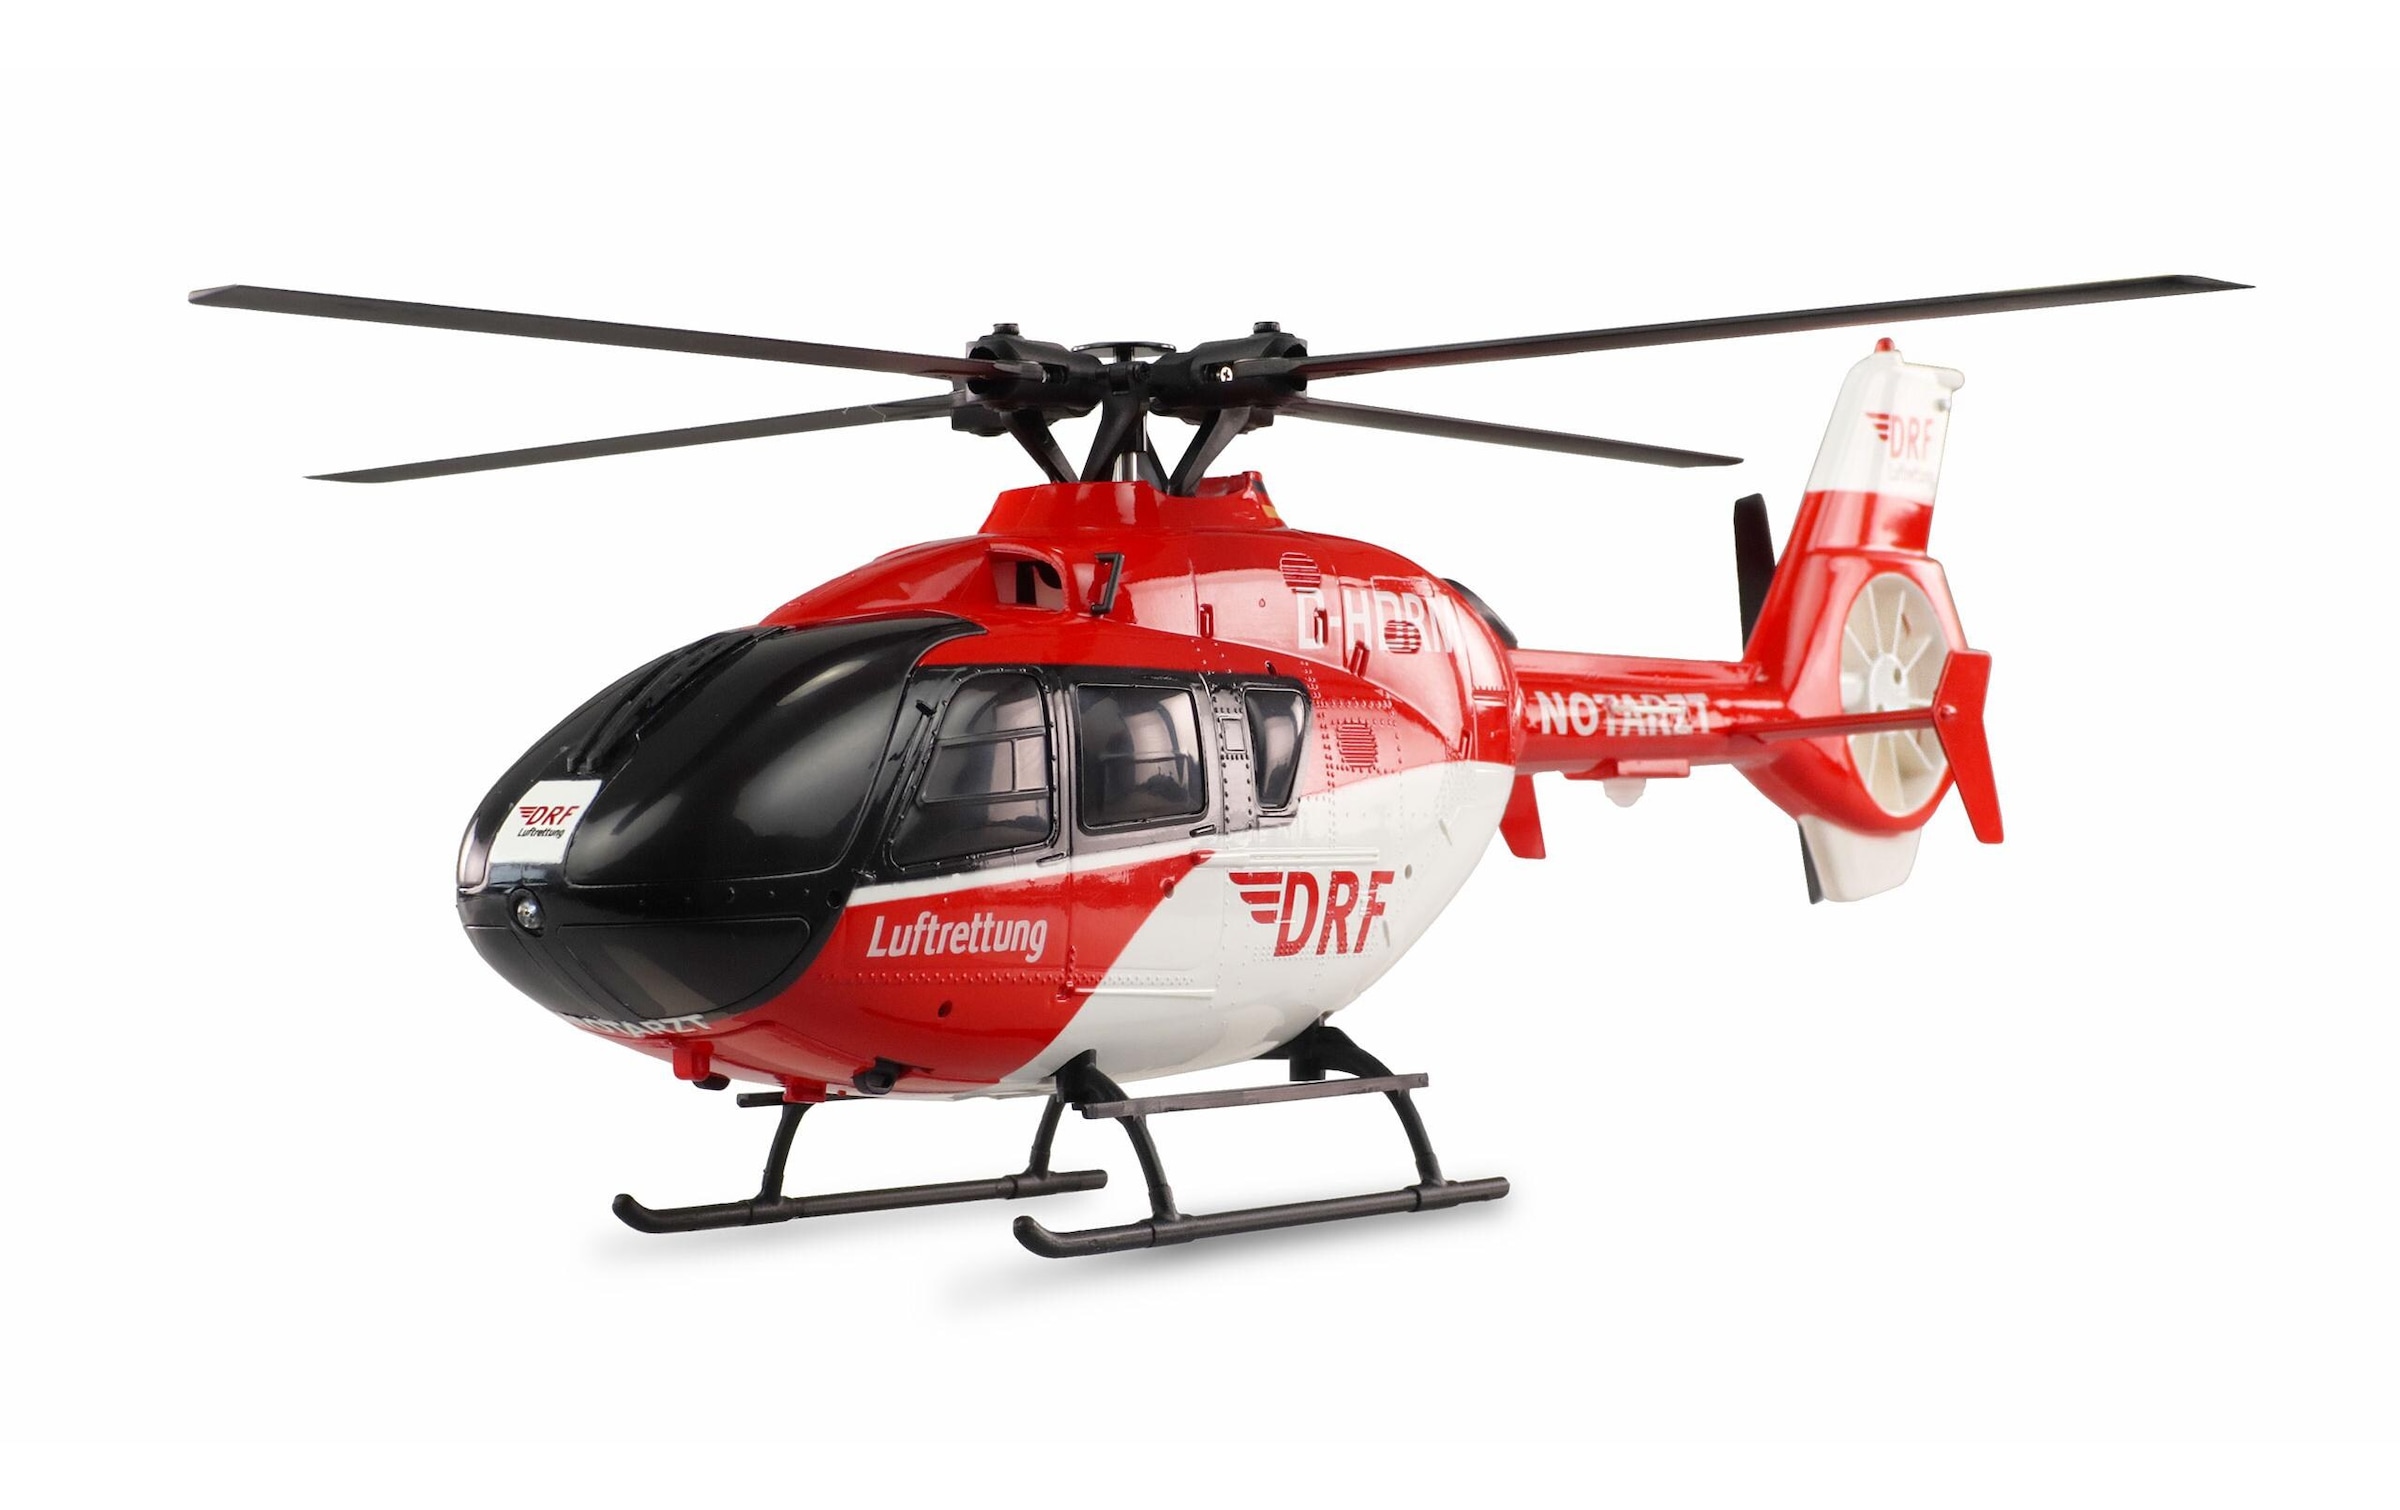 Amewi RC-Helikopter »AFX-135 Pro Brushless CP RTF«